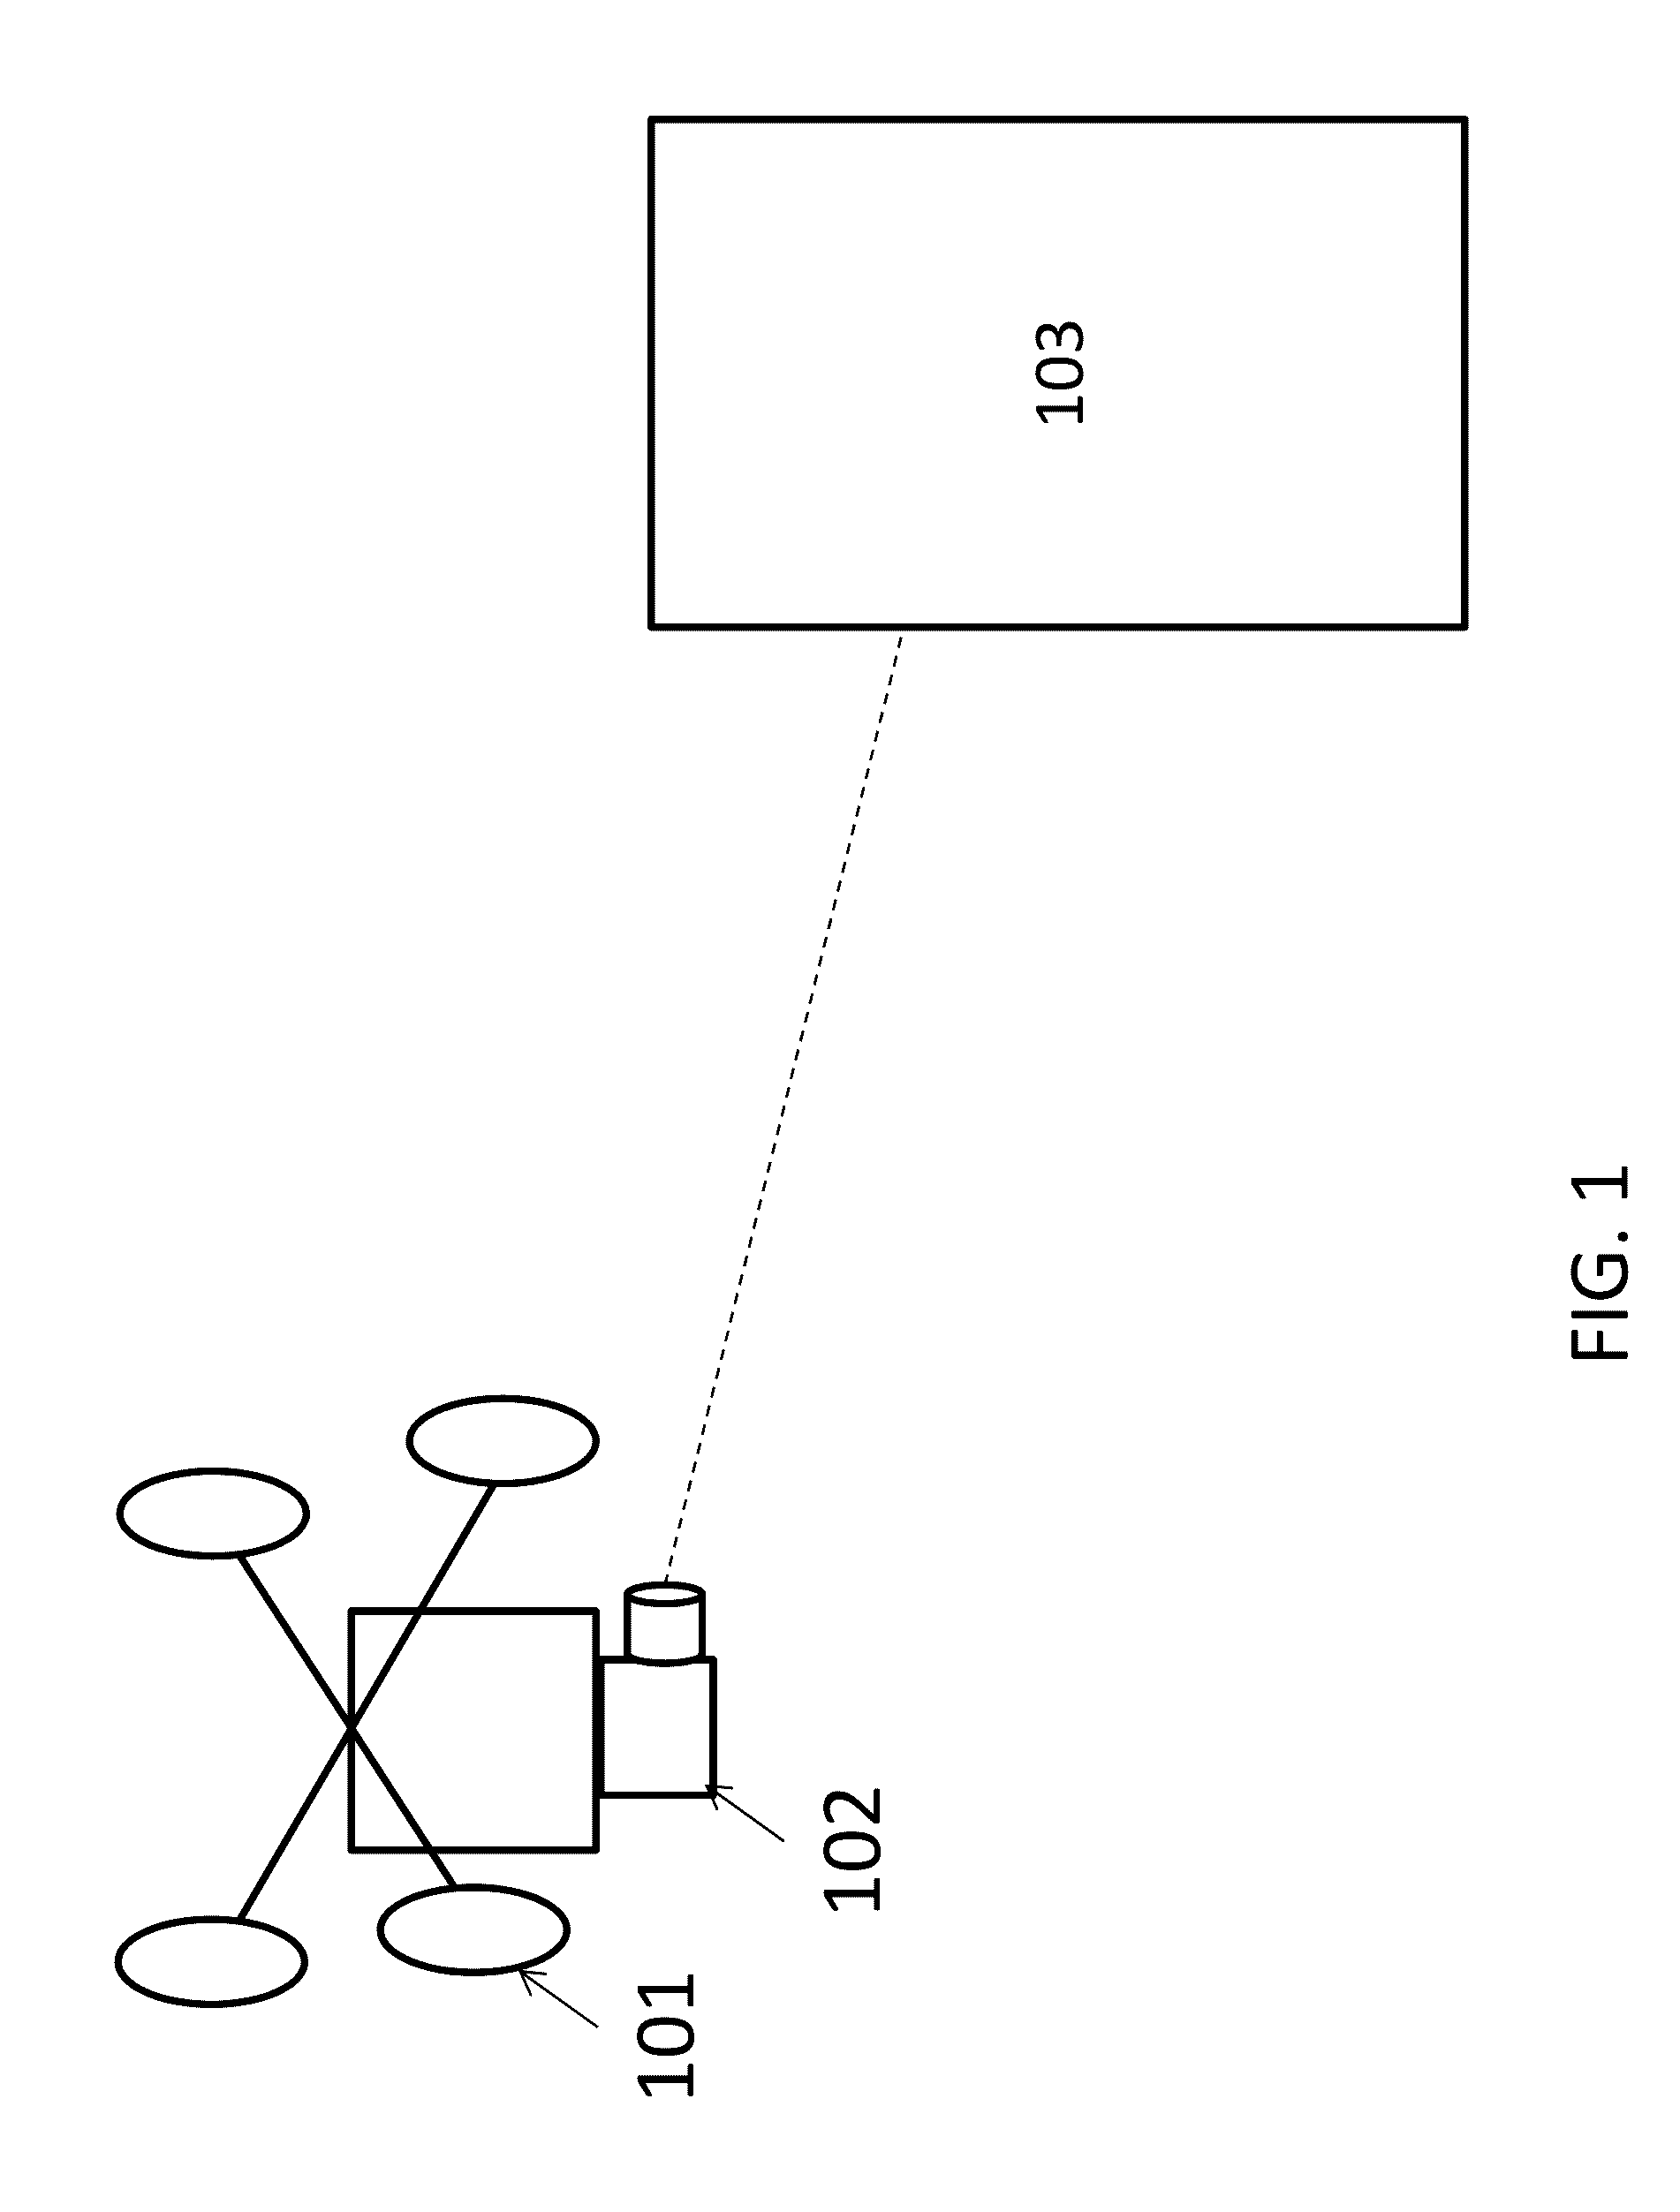 Systems and methods for surveillance with a visual marker